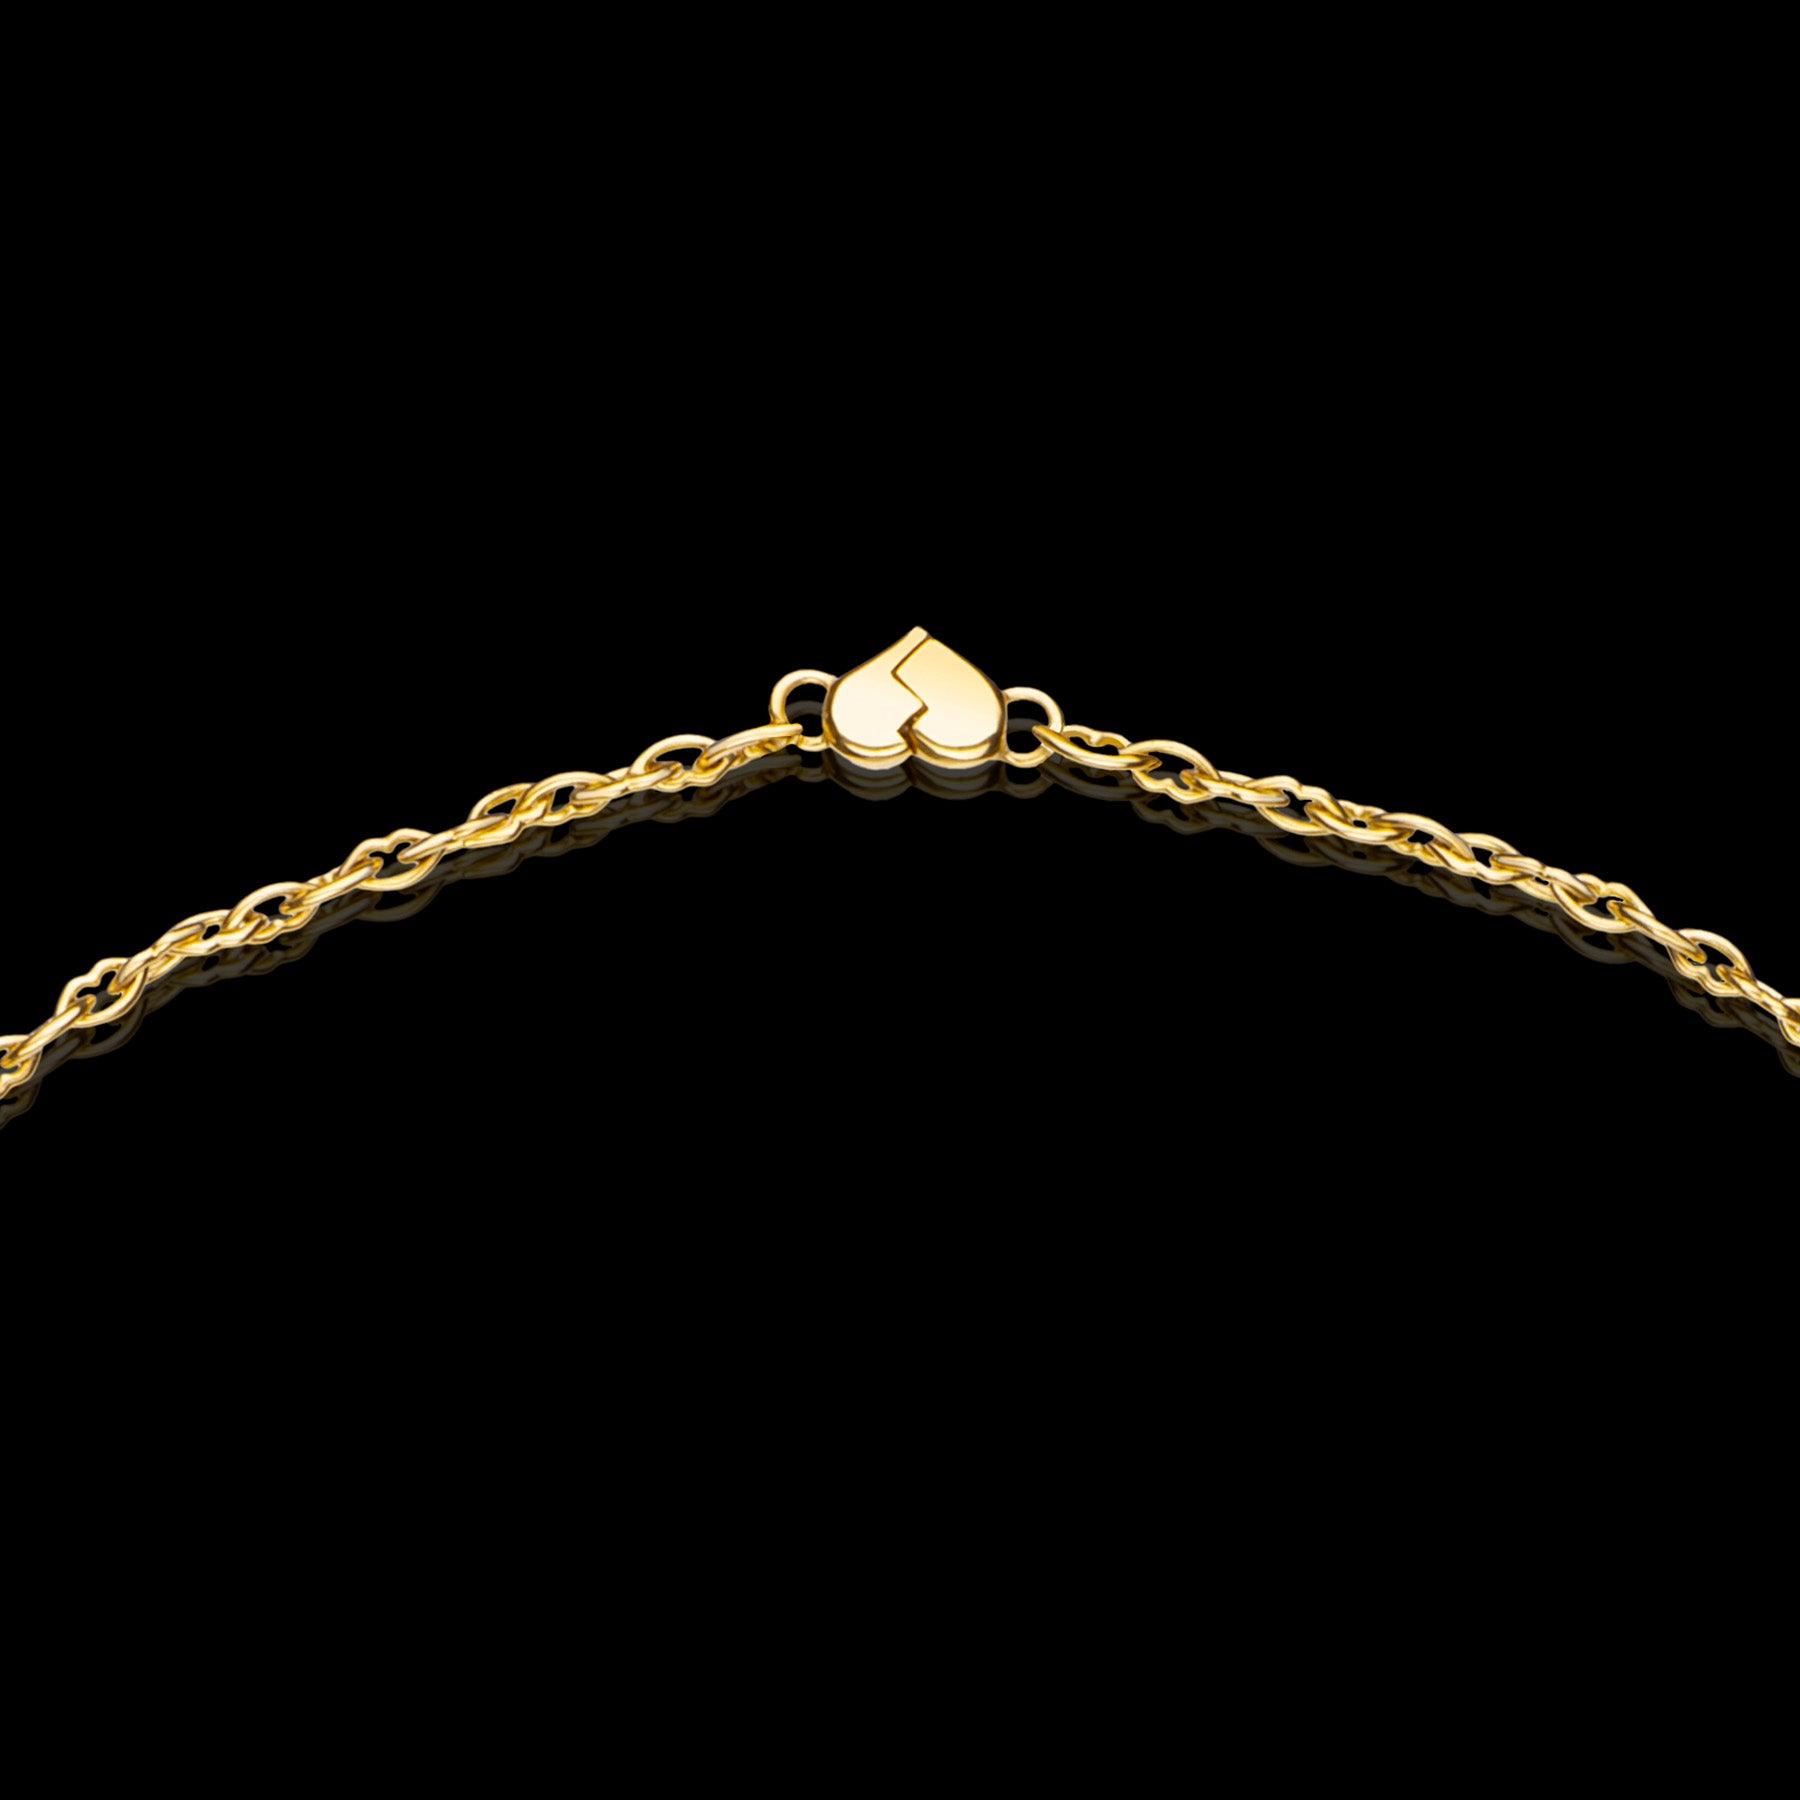 The Love and Kisses chain short necklace by Solange Azagury-Partridge - 18 carat Yellow Gold - detail crop